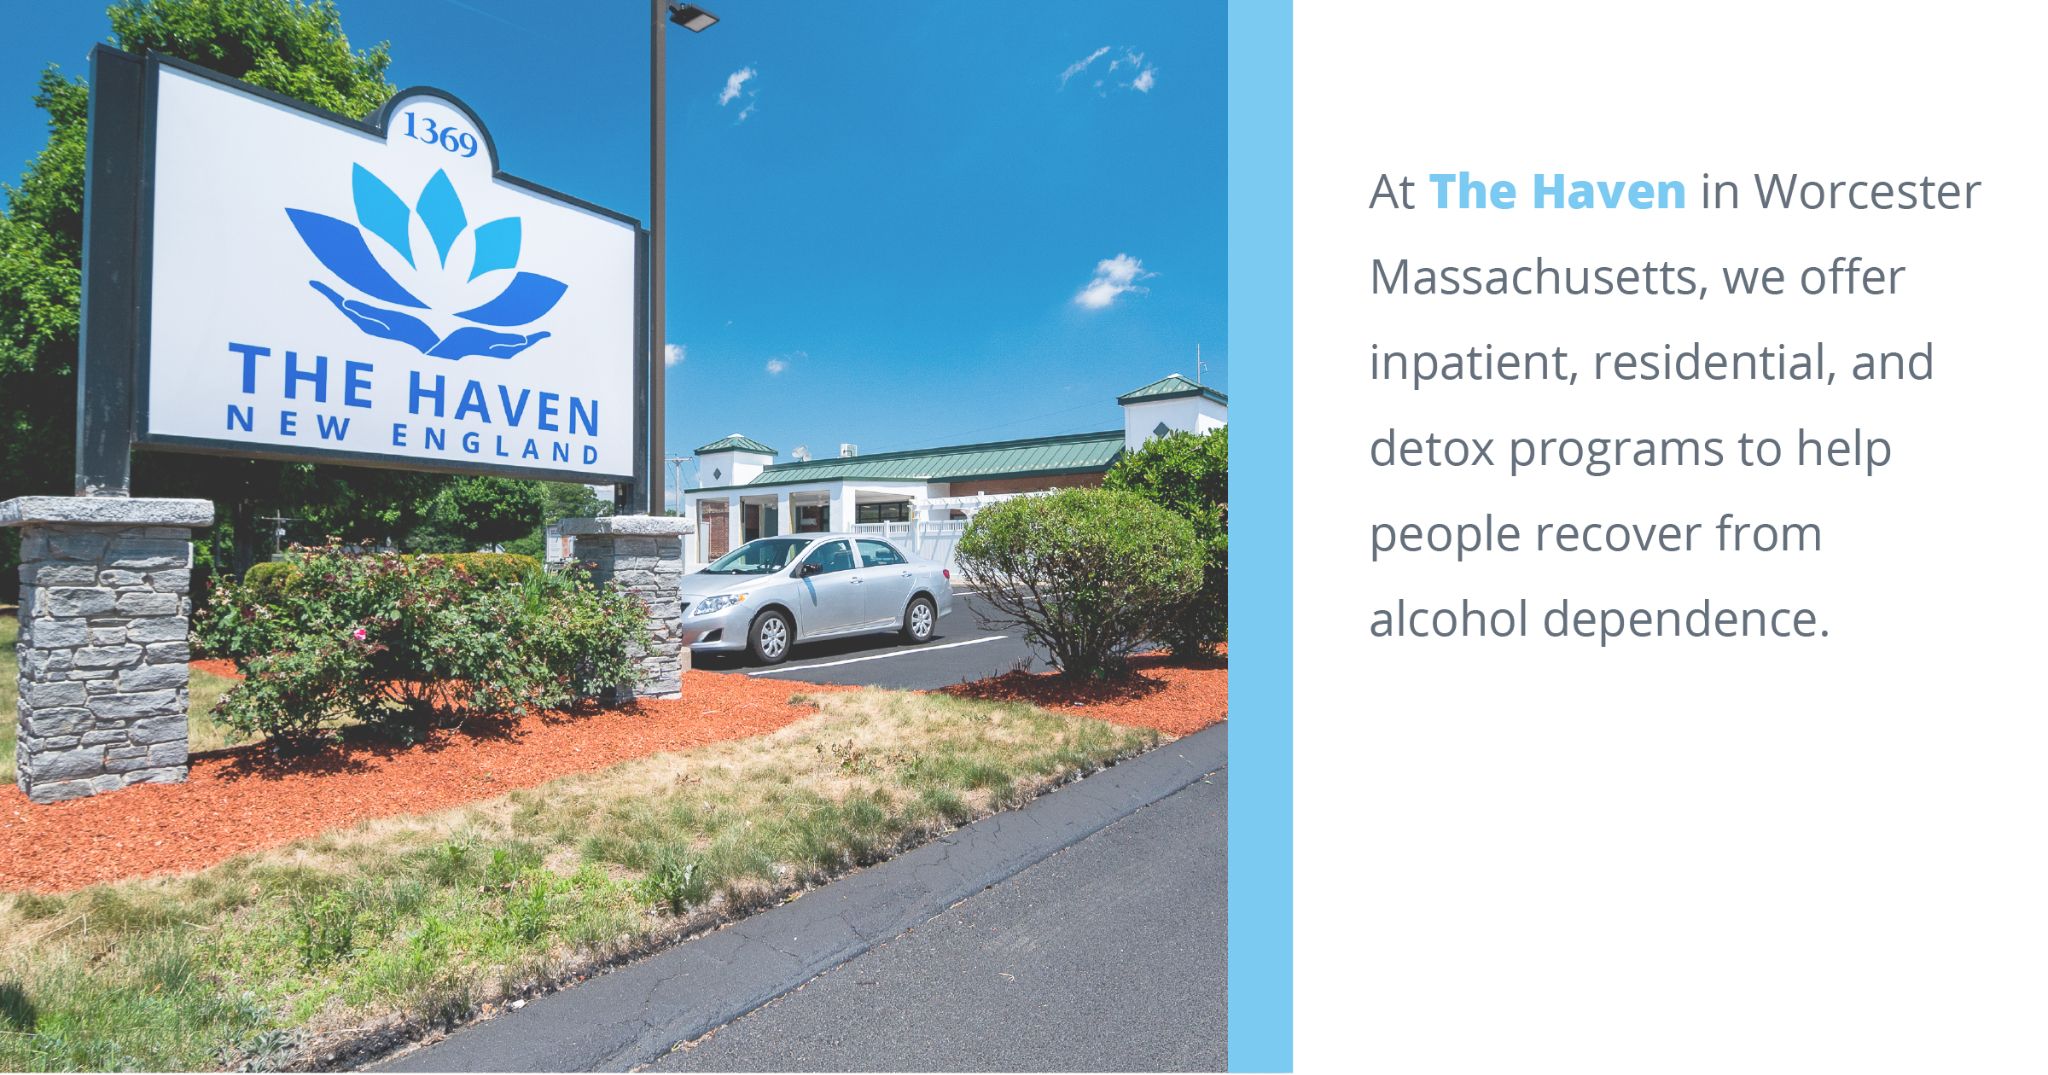 At the haven in Worcester Massachusetts, we offer inpatient, residential, and detox programs to help people recover from alcohol dependence